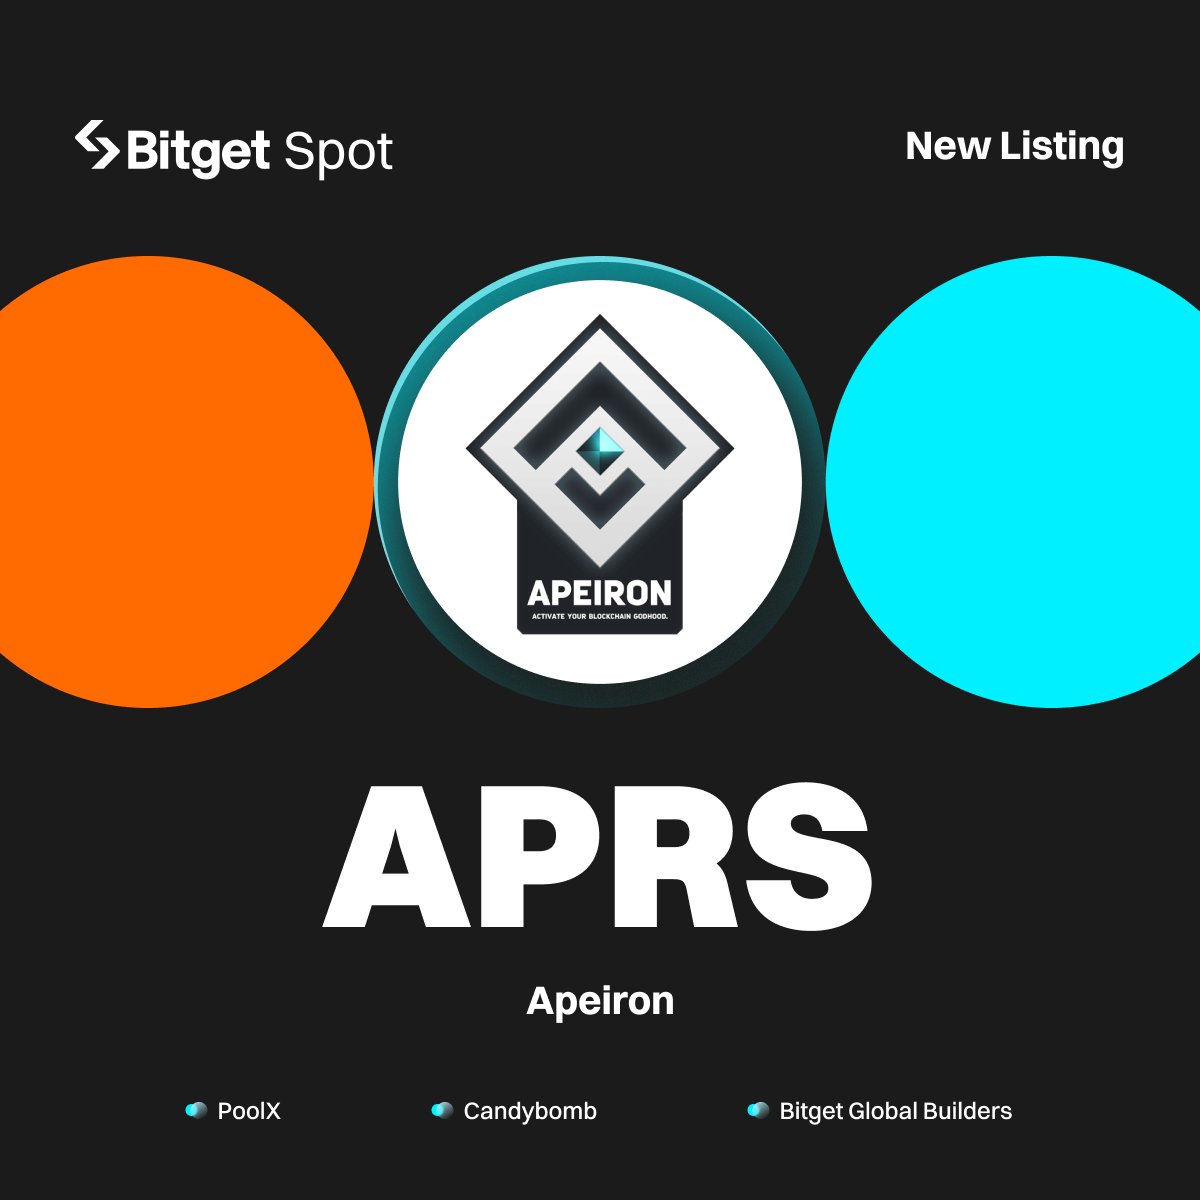 New Listing - $APRS @ApeironNFT

#Bitget will list APRS/USDT with 410,700 APRS up for grabs!

🔹Deposit: opened
🔹Trading starts: May 9, 7:00 AM (UTC)

More details: bitget.com/en/support/art…

#APRSlistBitget